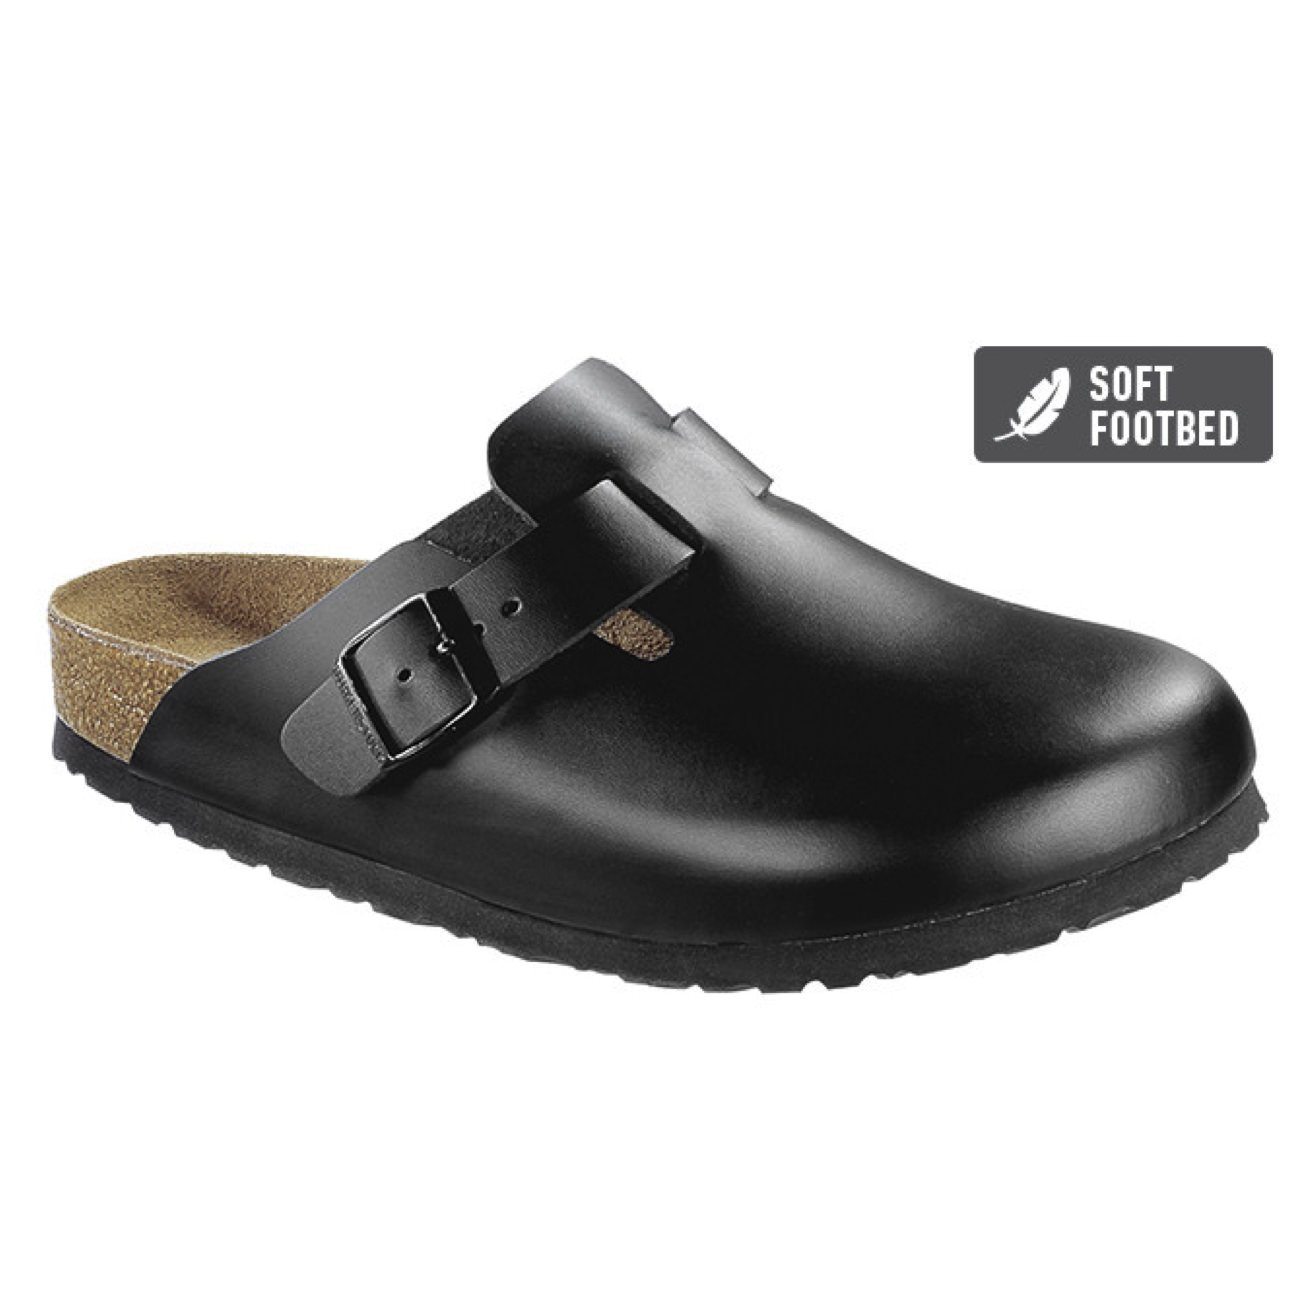 Birkenstock Classic, Boston, Soft-Footbed, Narrow Fit, Smooth Leather, Black Clogs Birkenstock Classic Black 36 